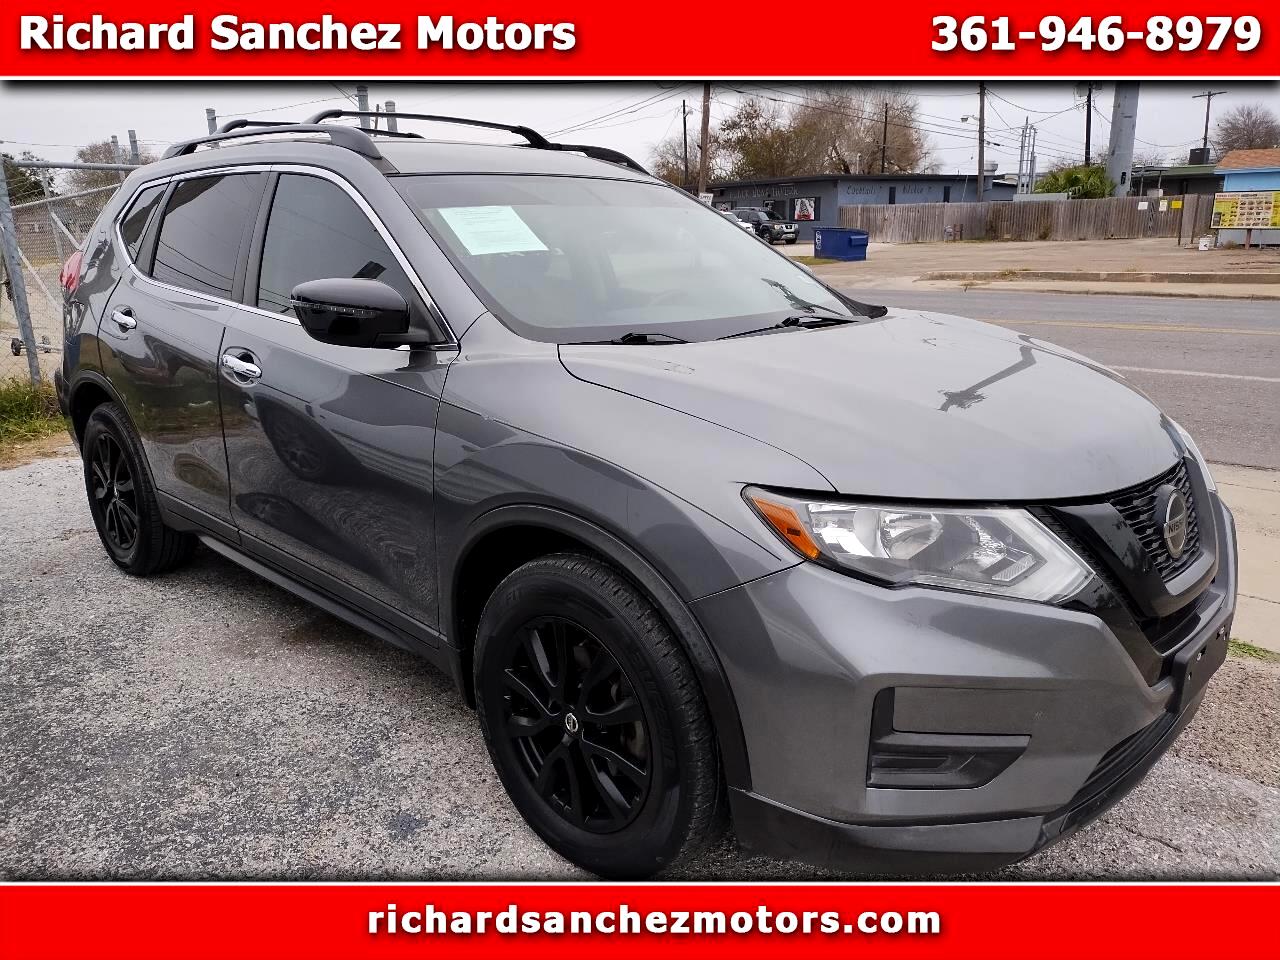 2018 Nissan Rogue S 2WD